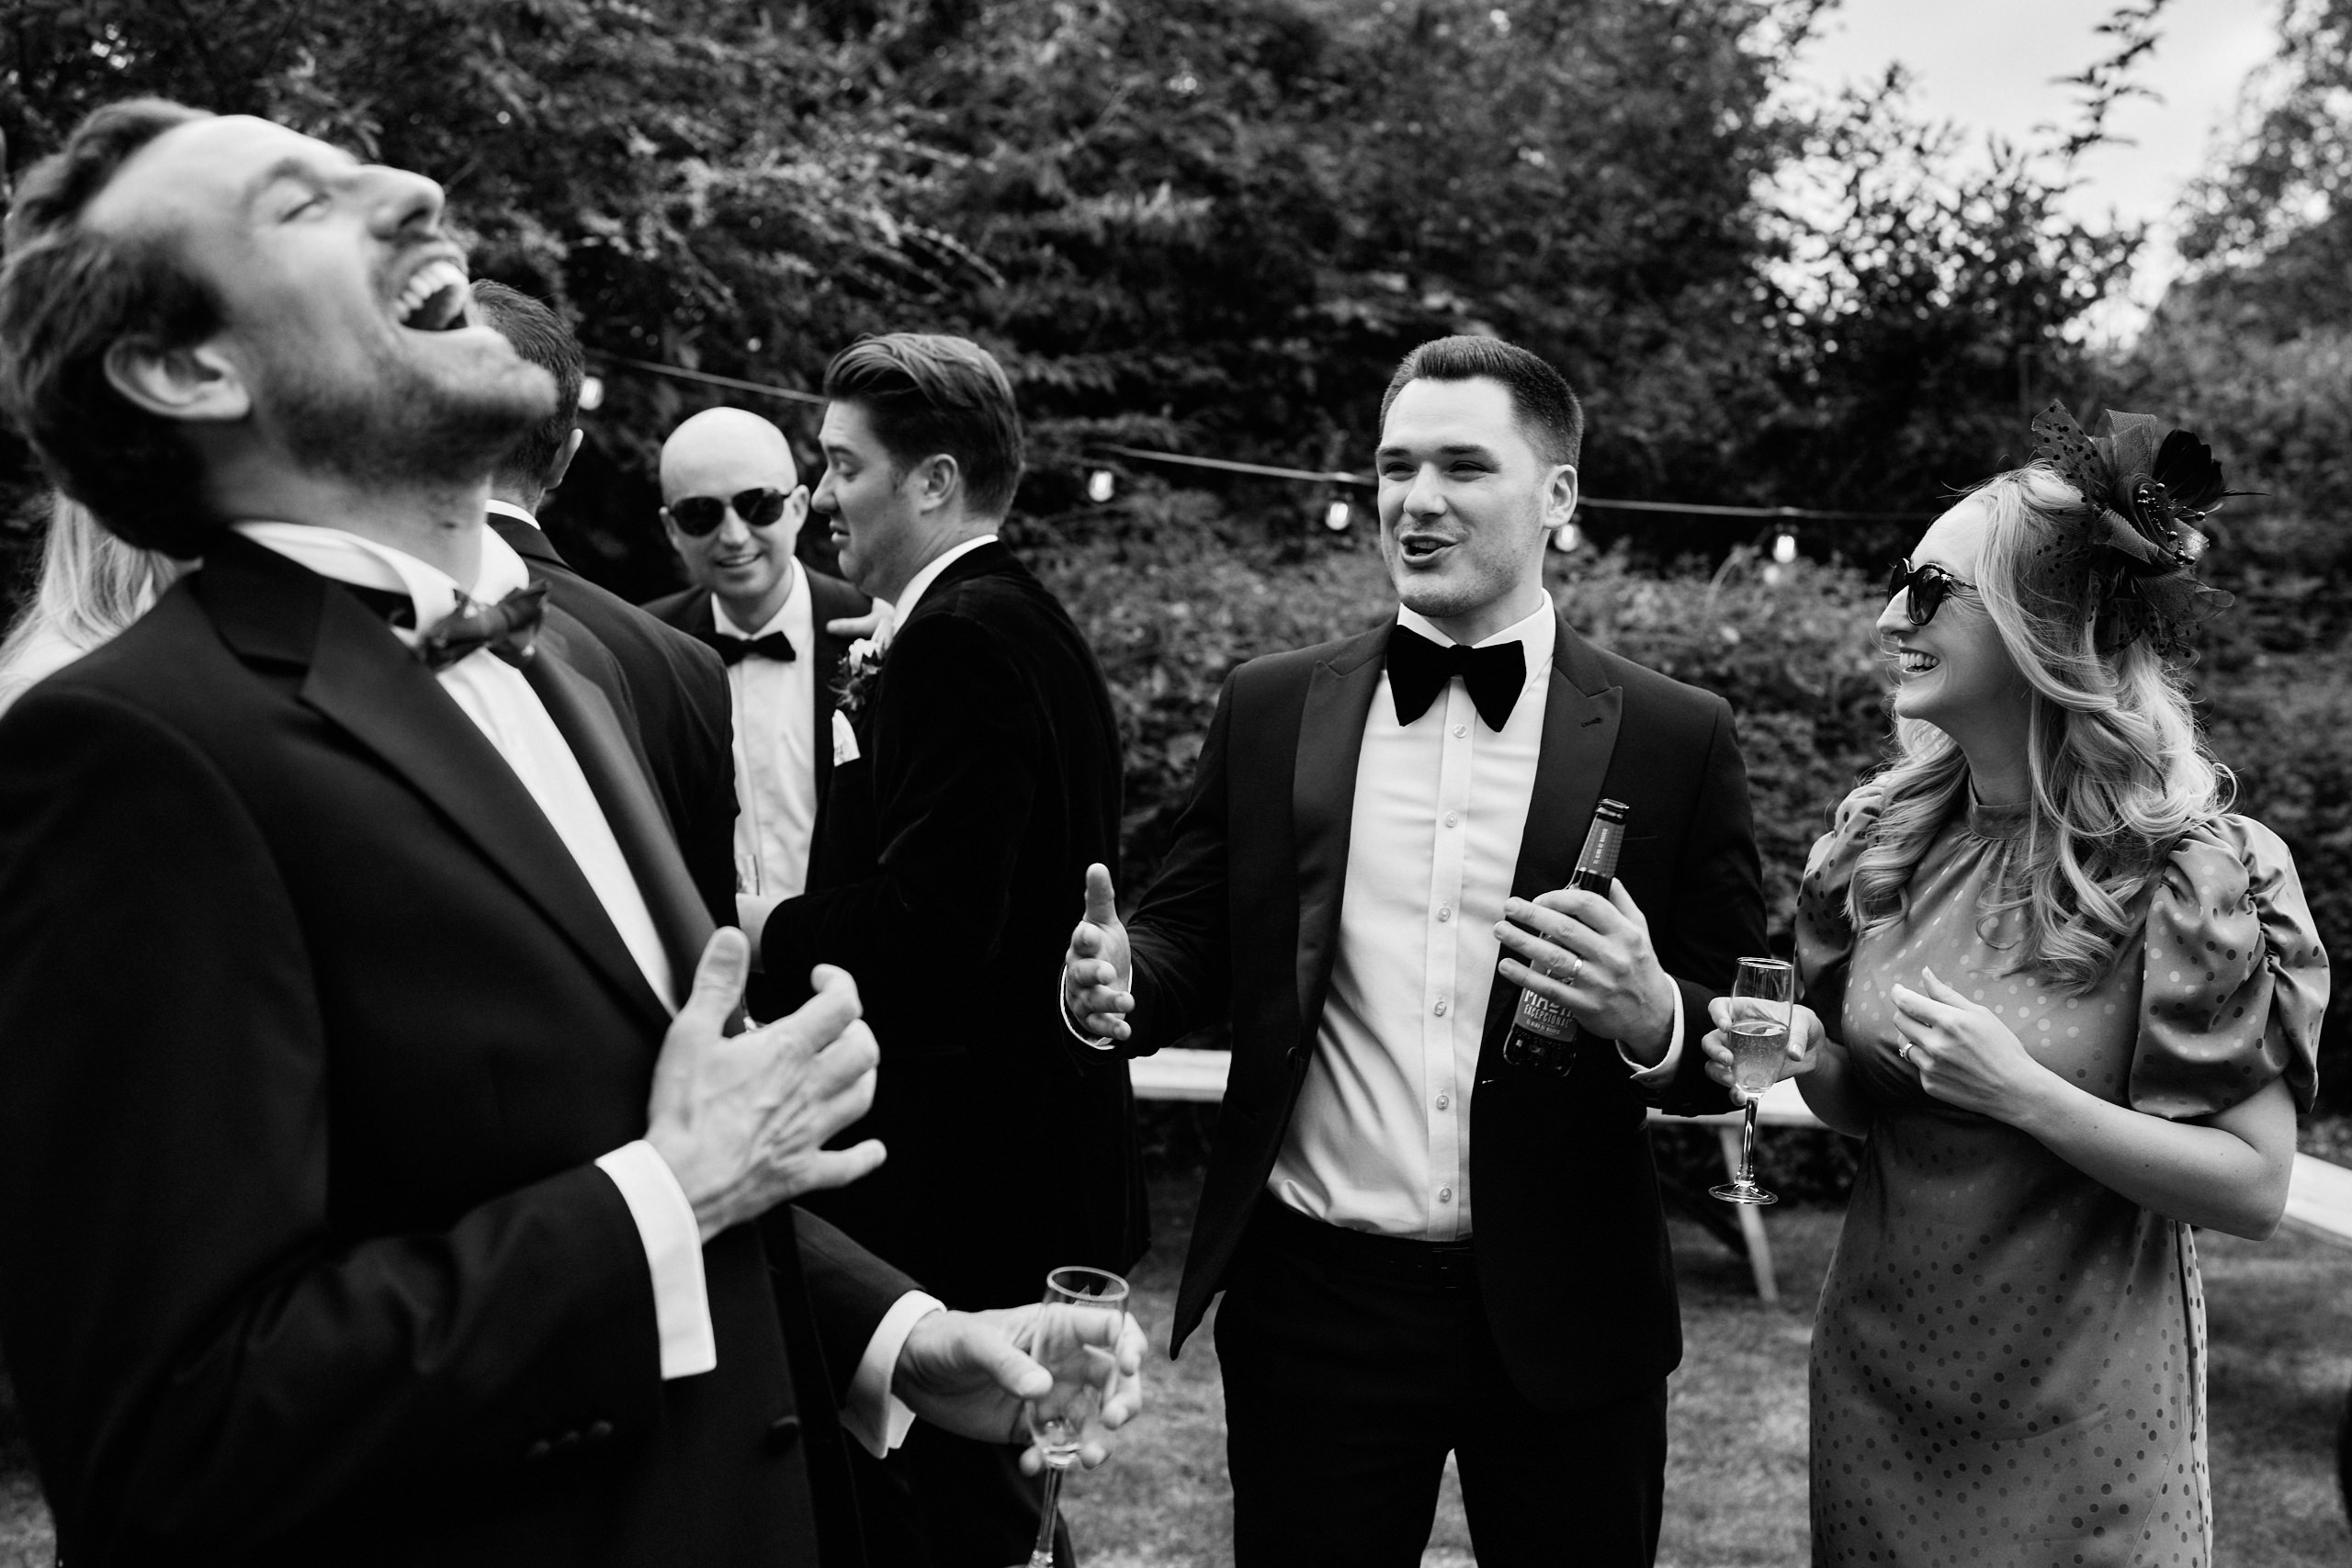 A black and white picture showing a bunch of people having a good laugh.